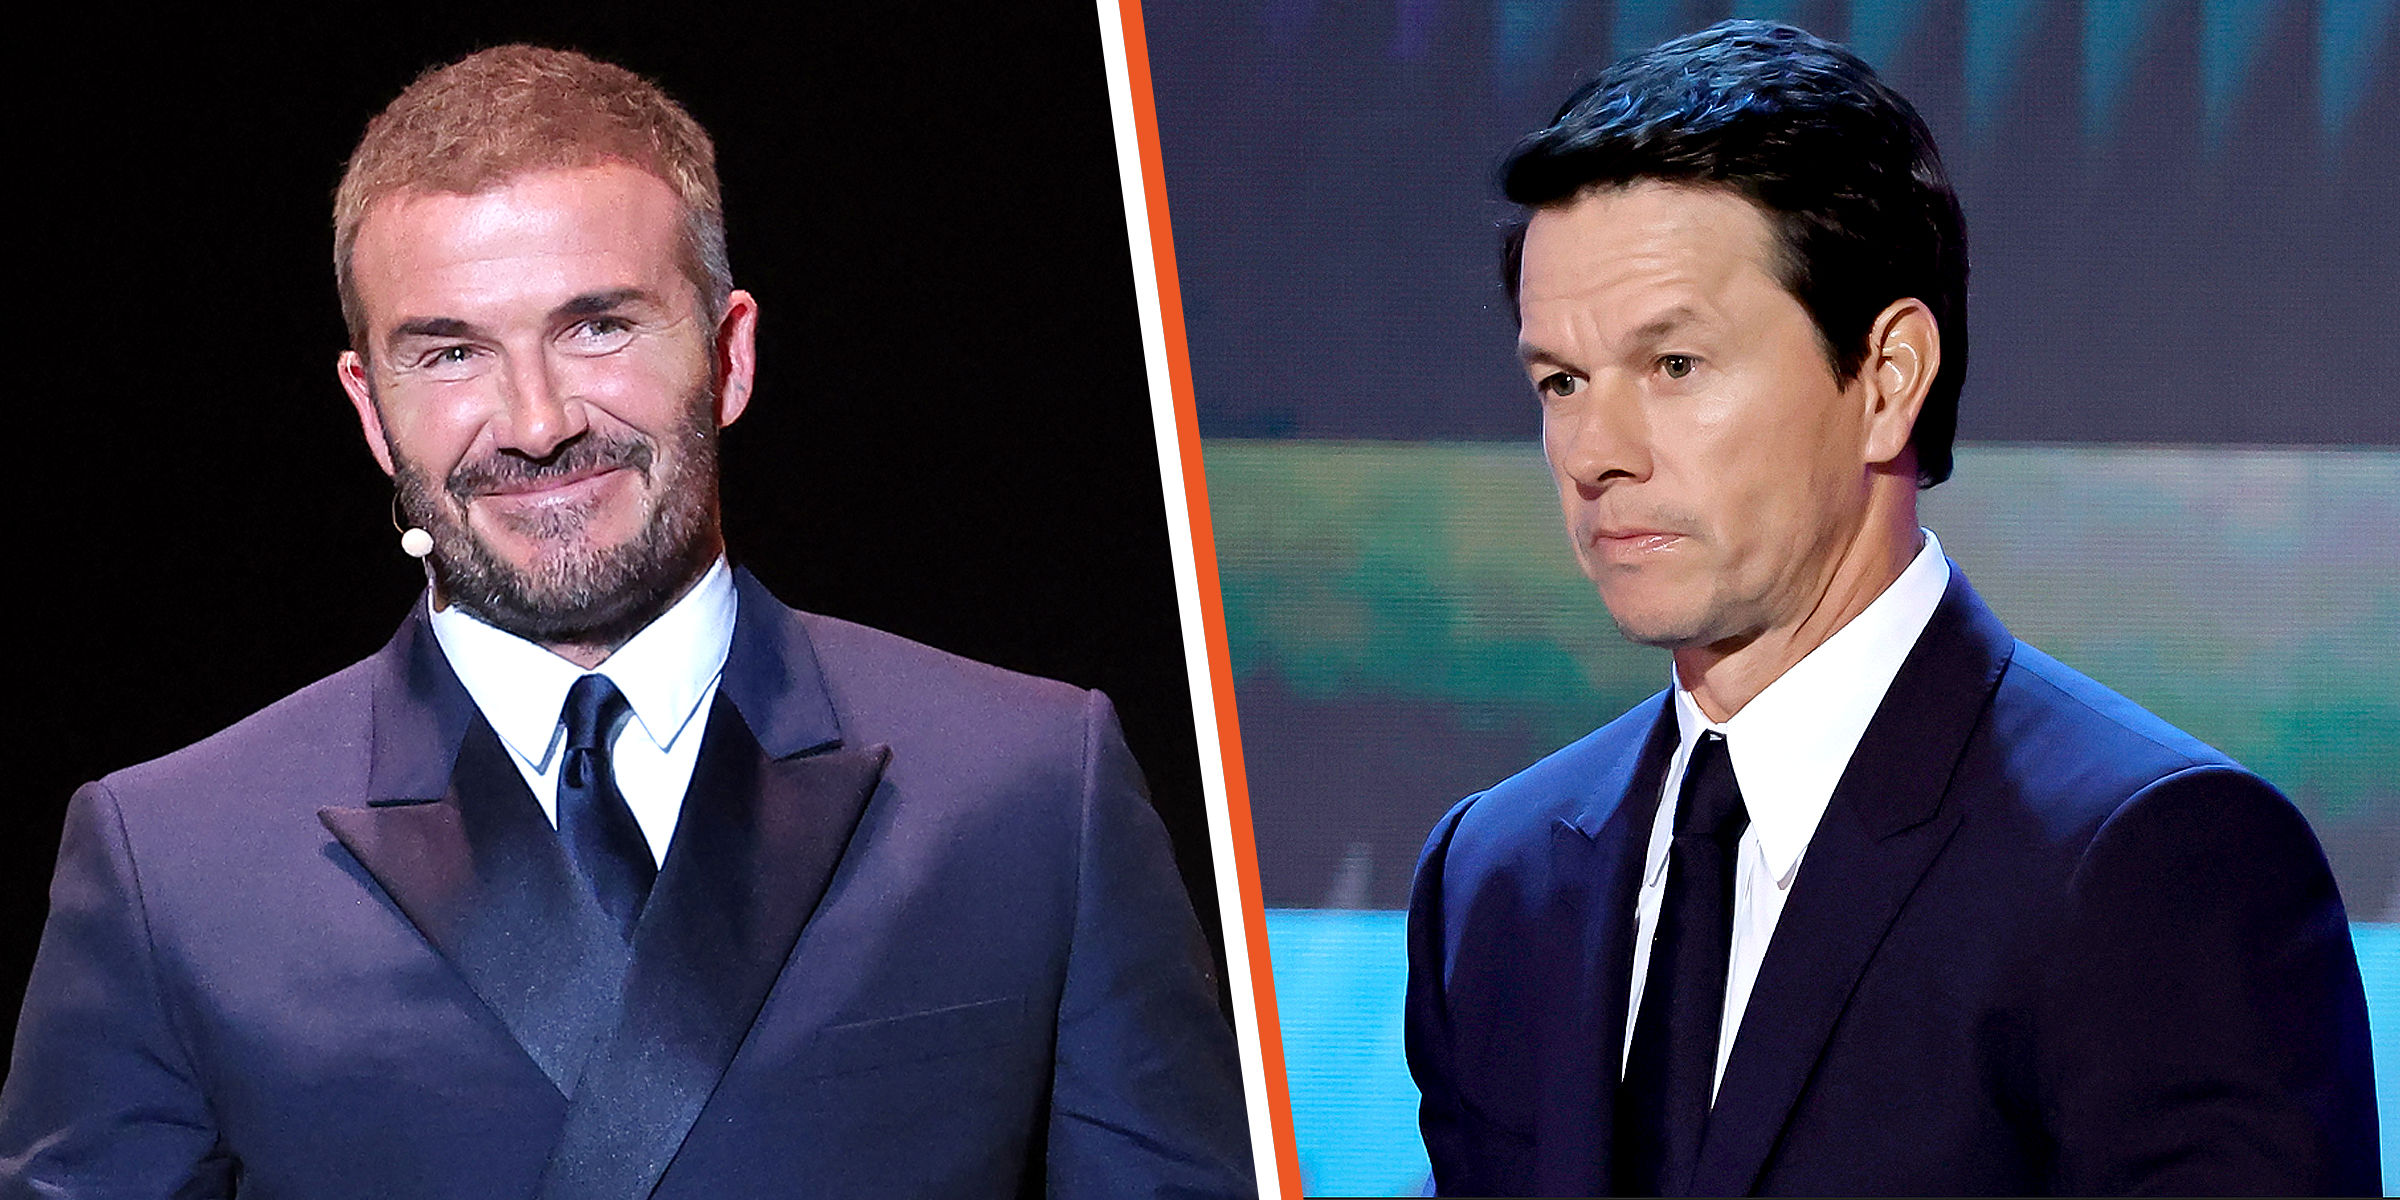 David Beckham and Mark Wahlberg | Source: Getty Images